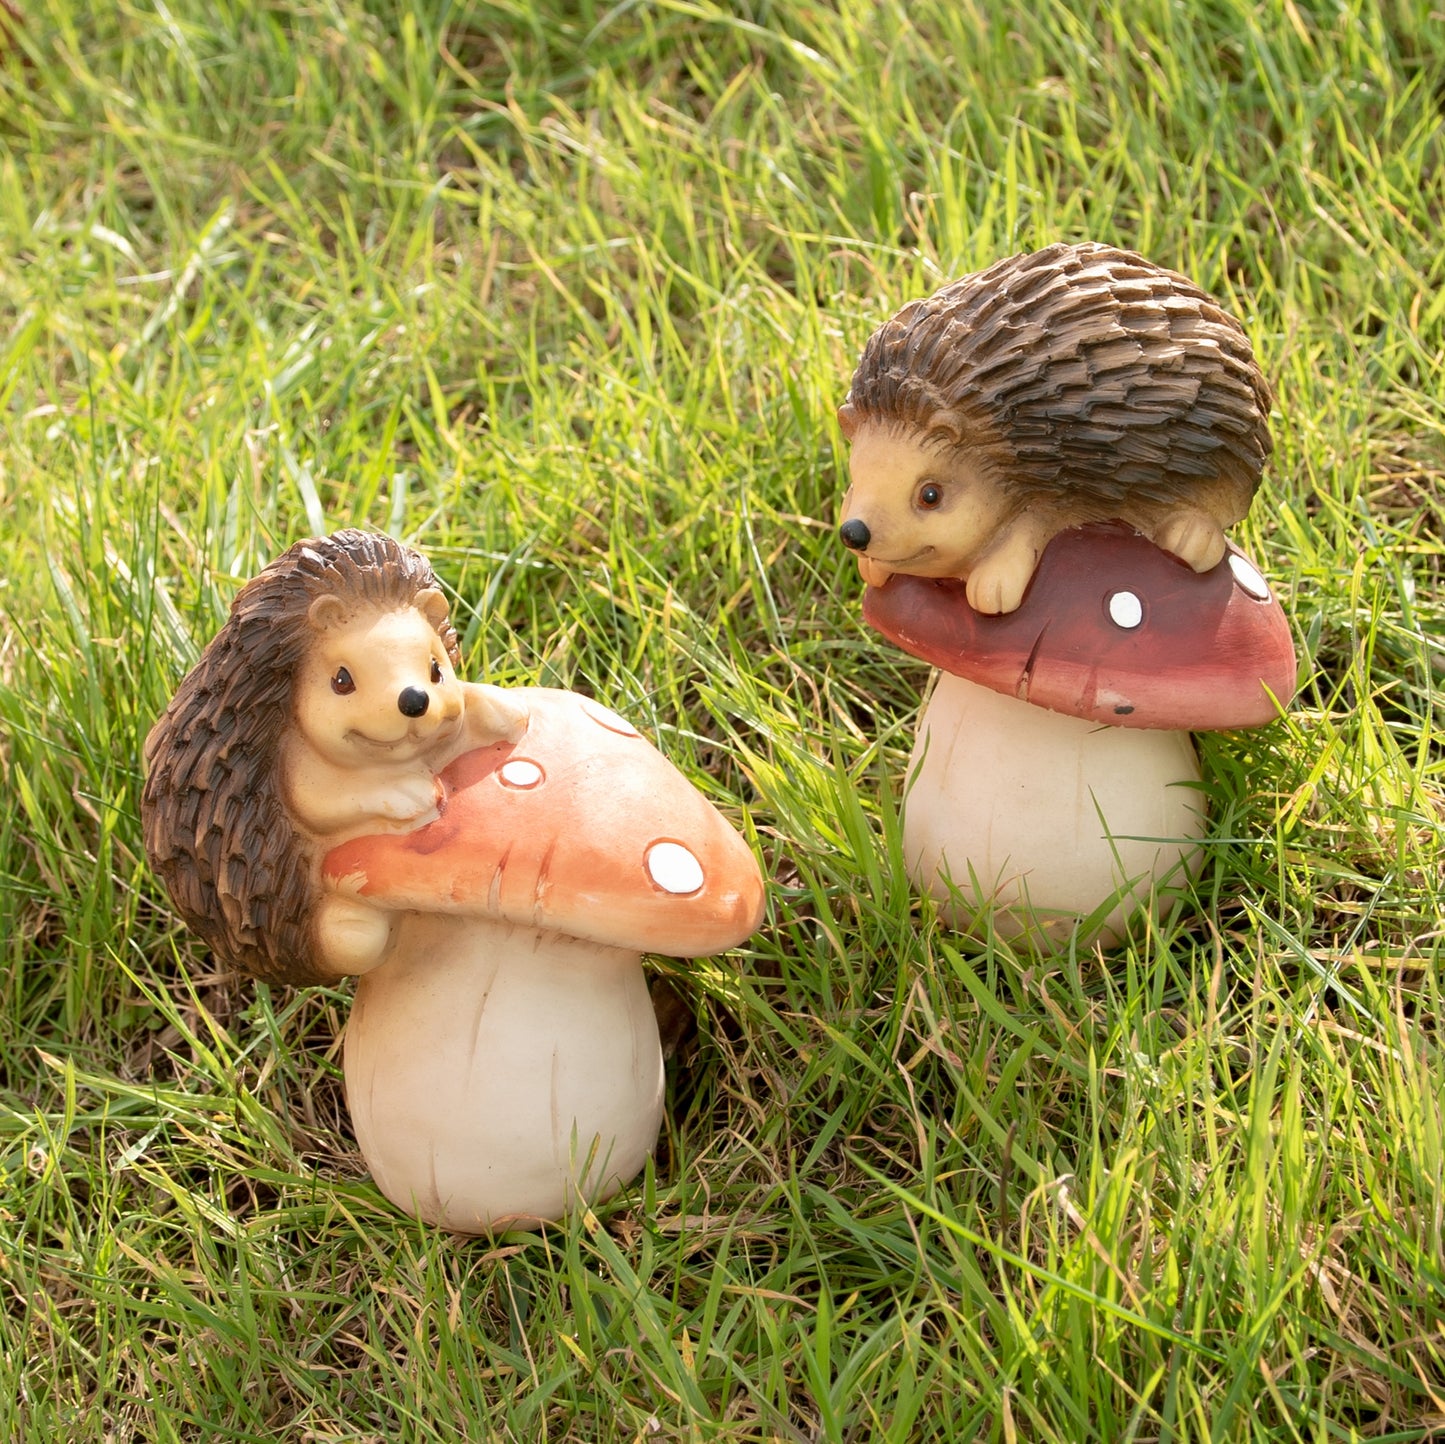 2 x Small Hedgehogs on Toadstools Garden Ornaments